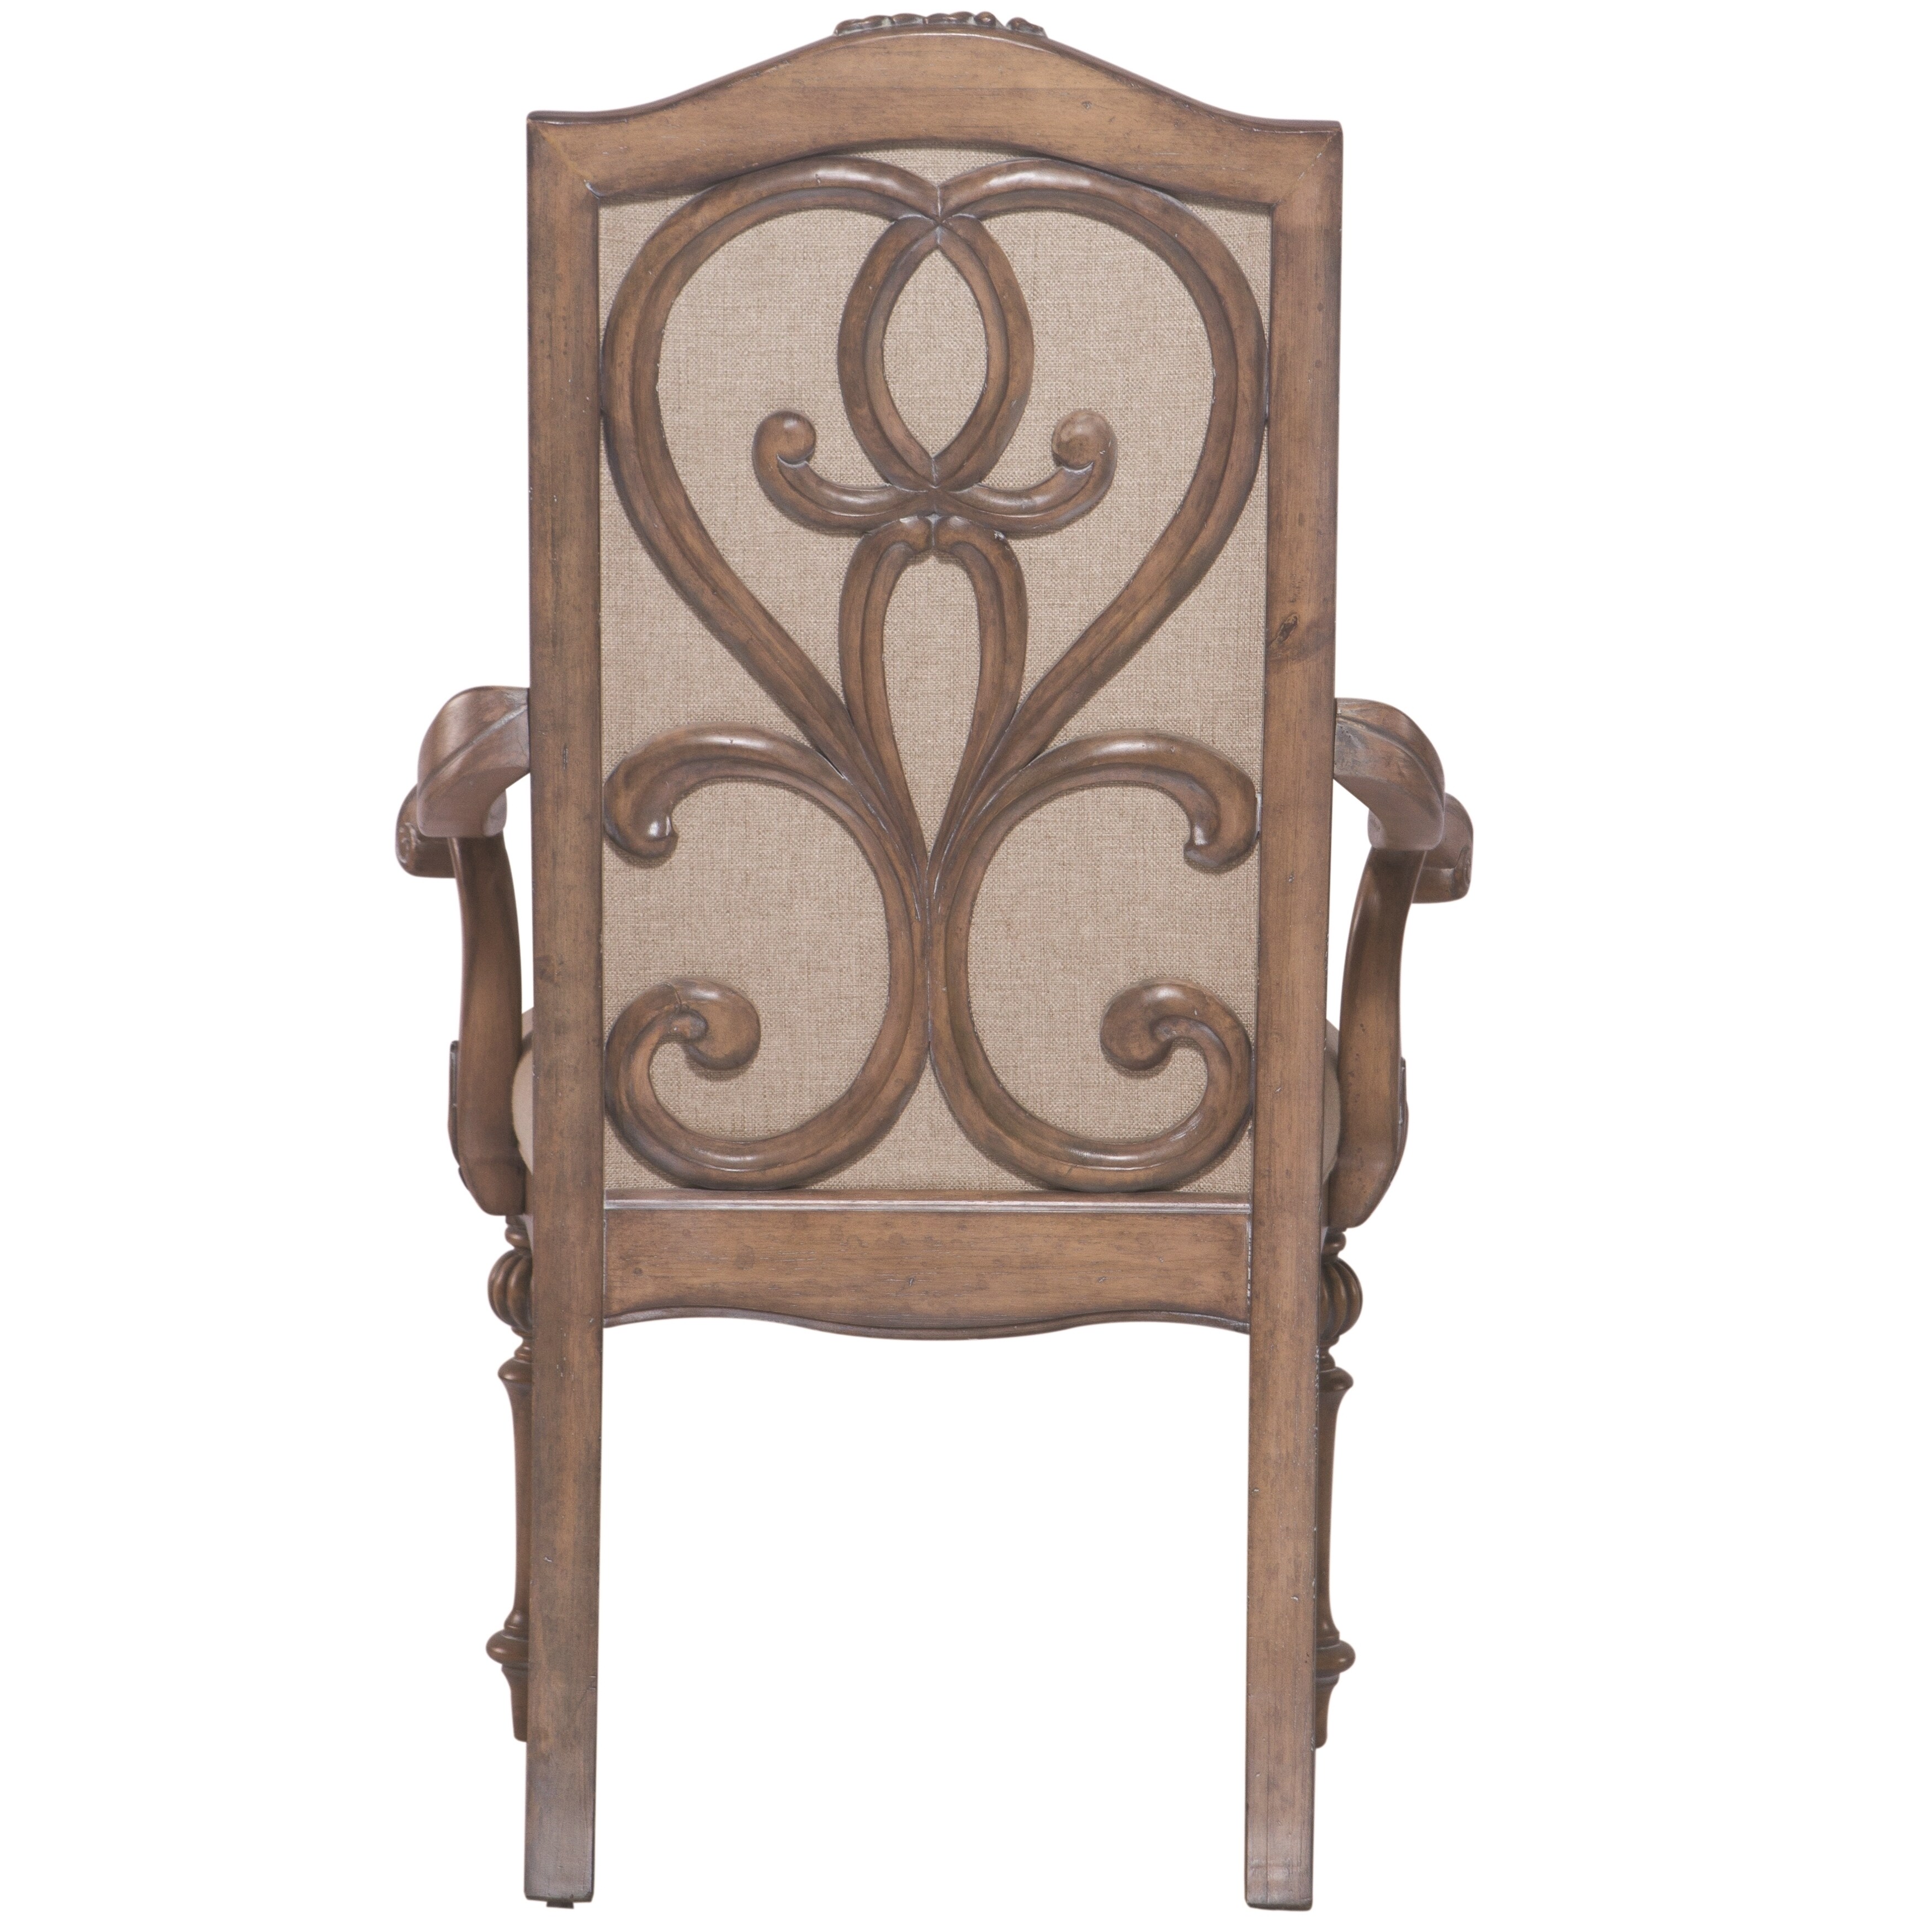  Antique Carved Wood Side Chair BIGMAII Fabric Upholstered Back  Dining Chair, King Louis Armchair with Flower Pattern, Royal Classic  Entryway Accent Chair White Dining Room Furniture - Chairs